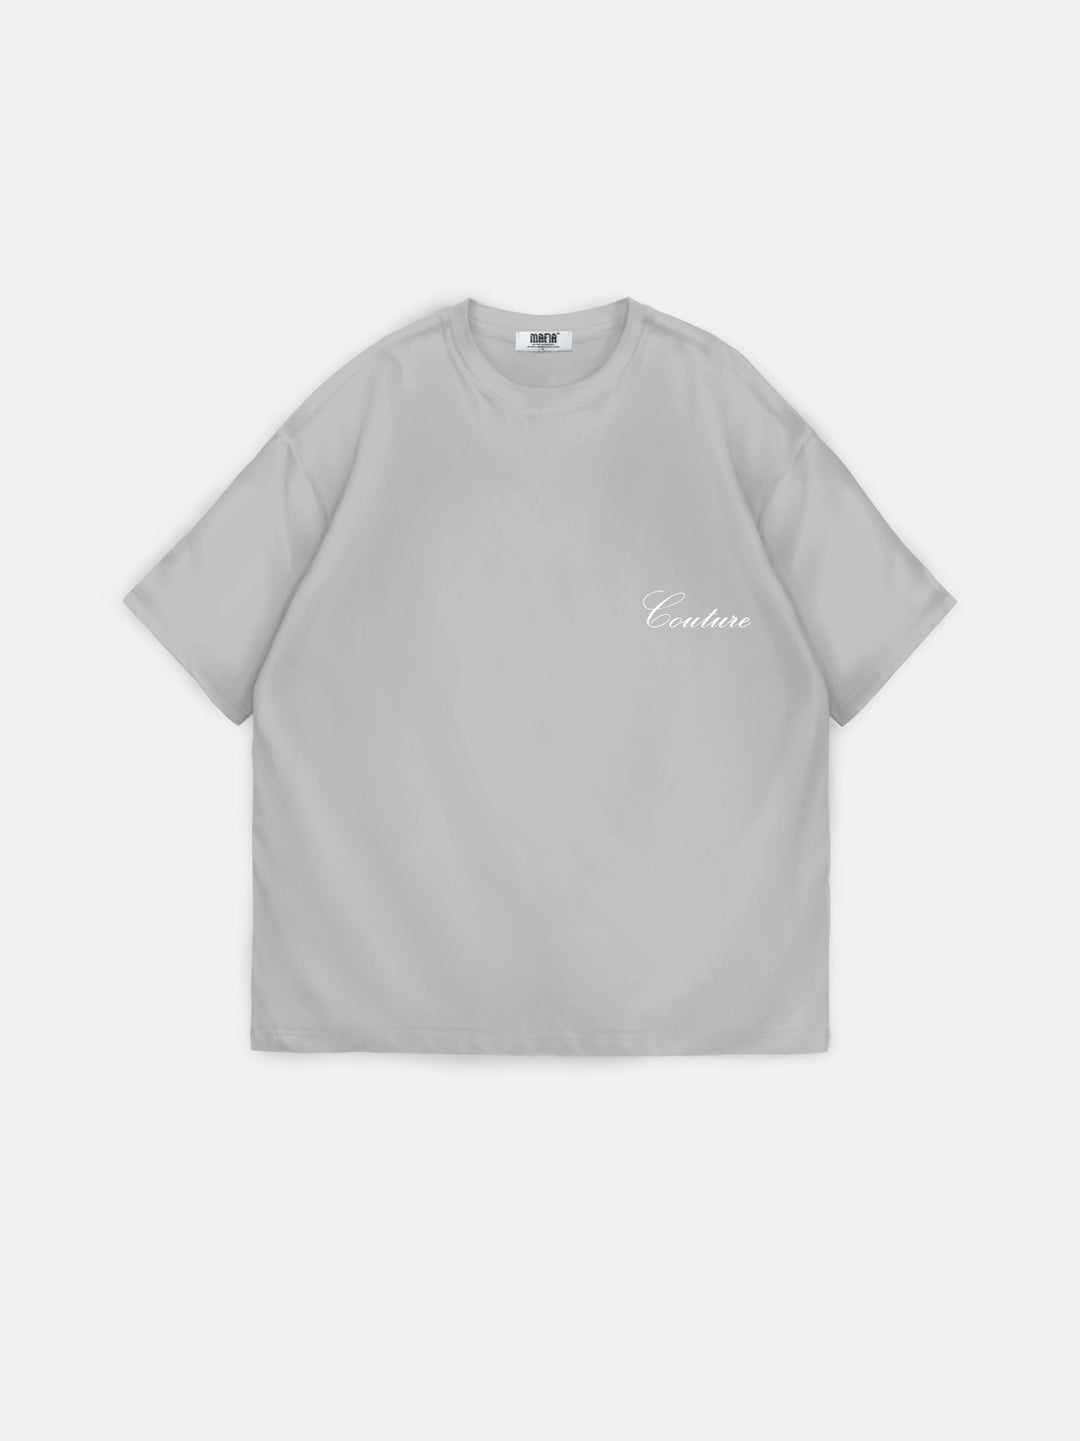 Oversize Couture T-shirt - Grey